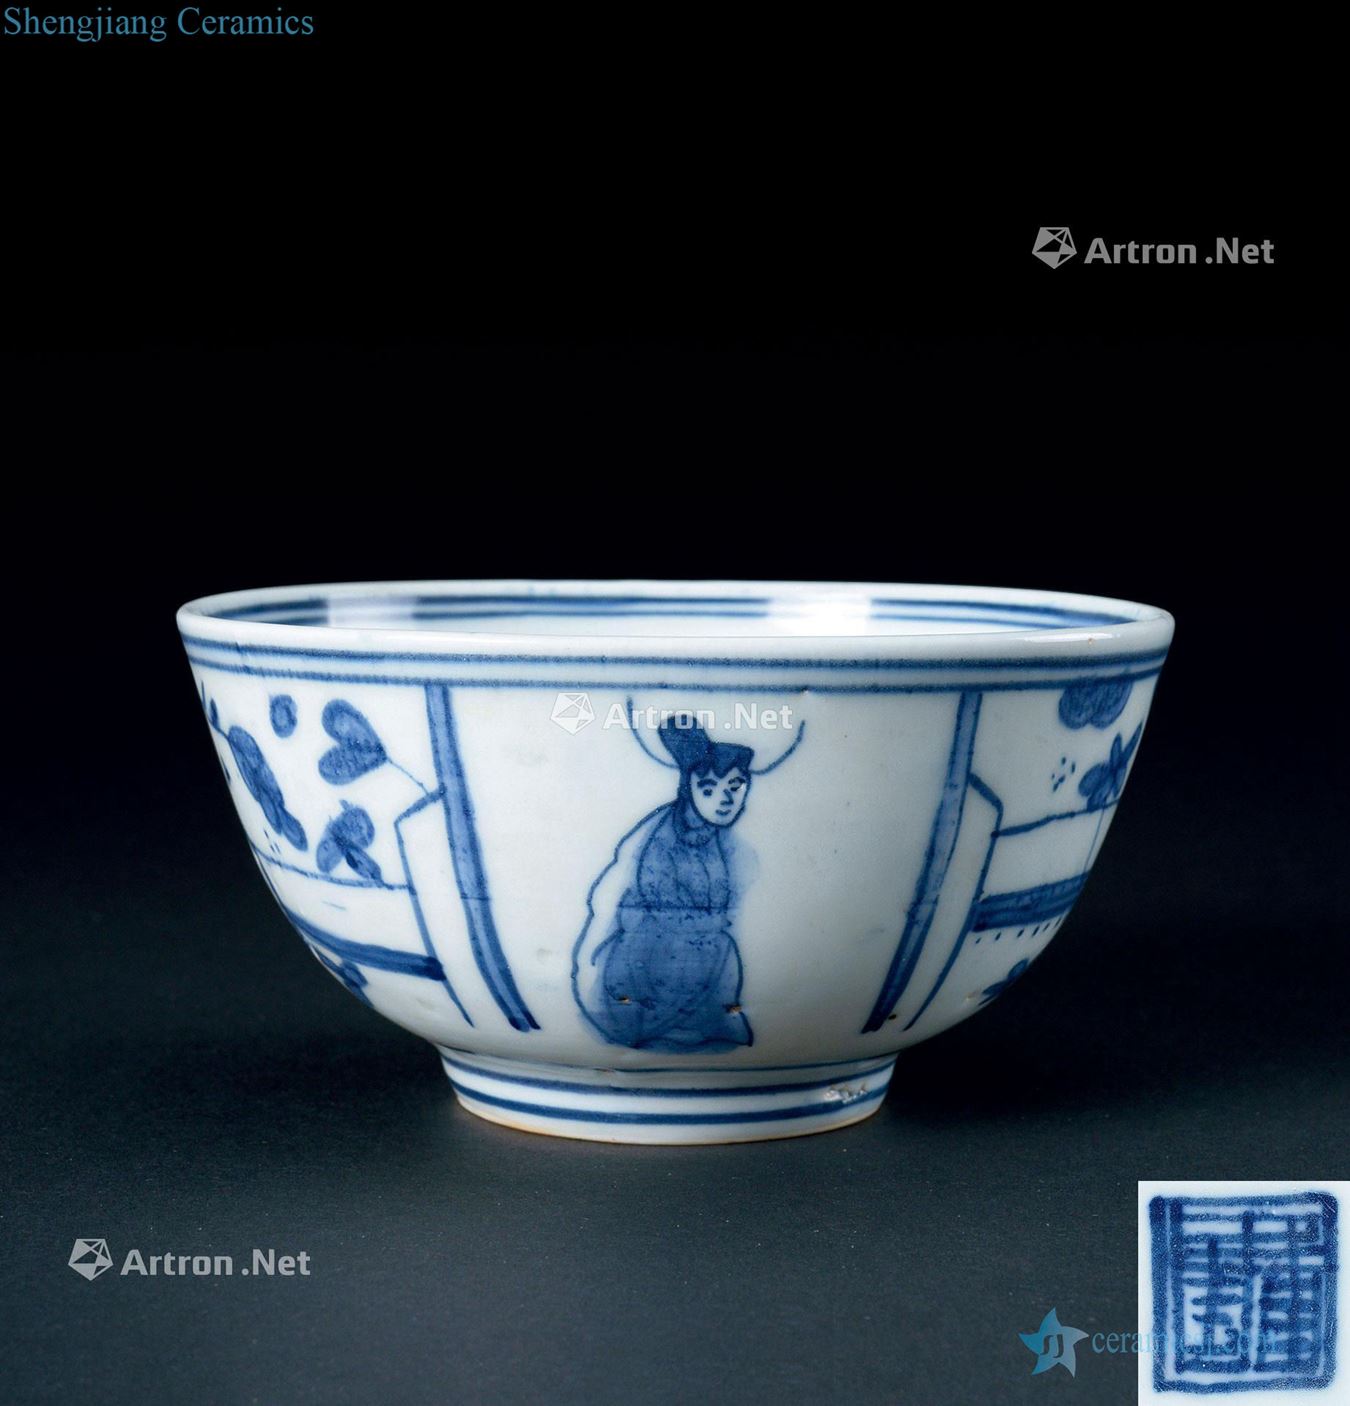 In the Ming dynasty (1368-1644) blue and white high green-splashed bowls